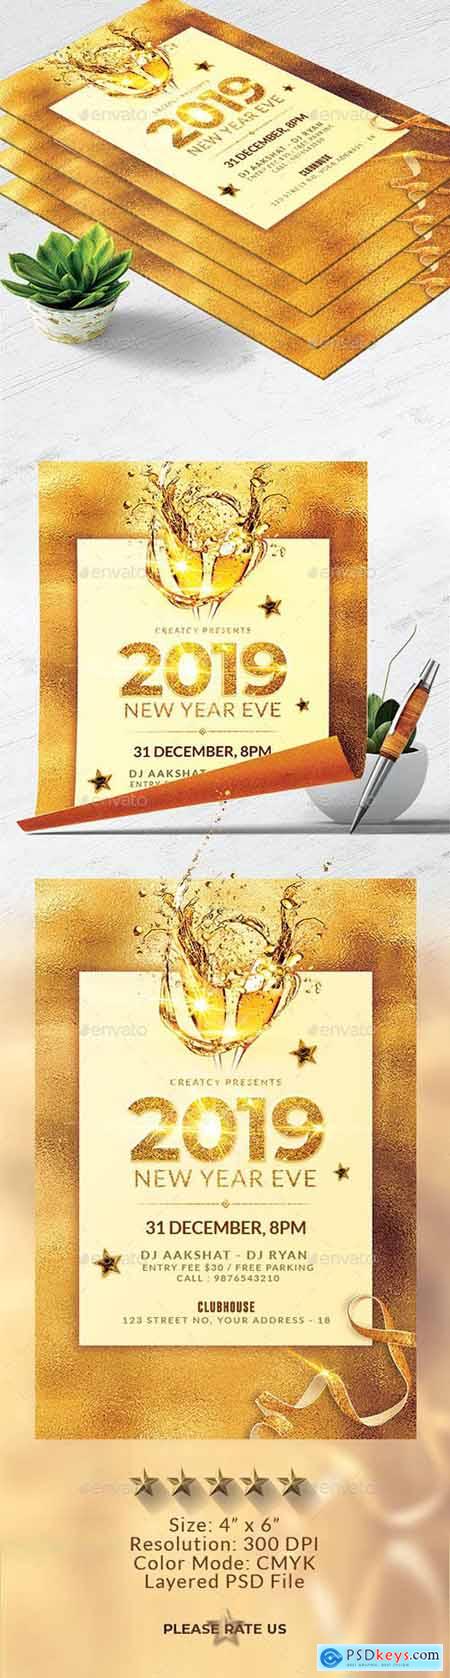 Graphicriver New Year